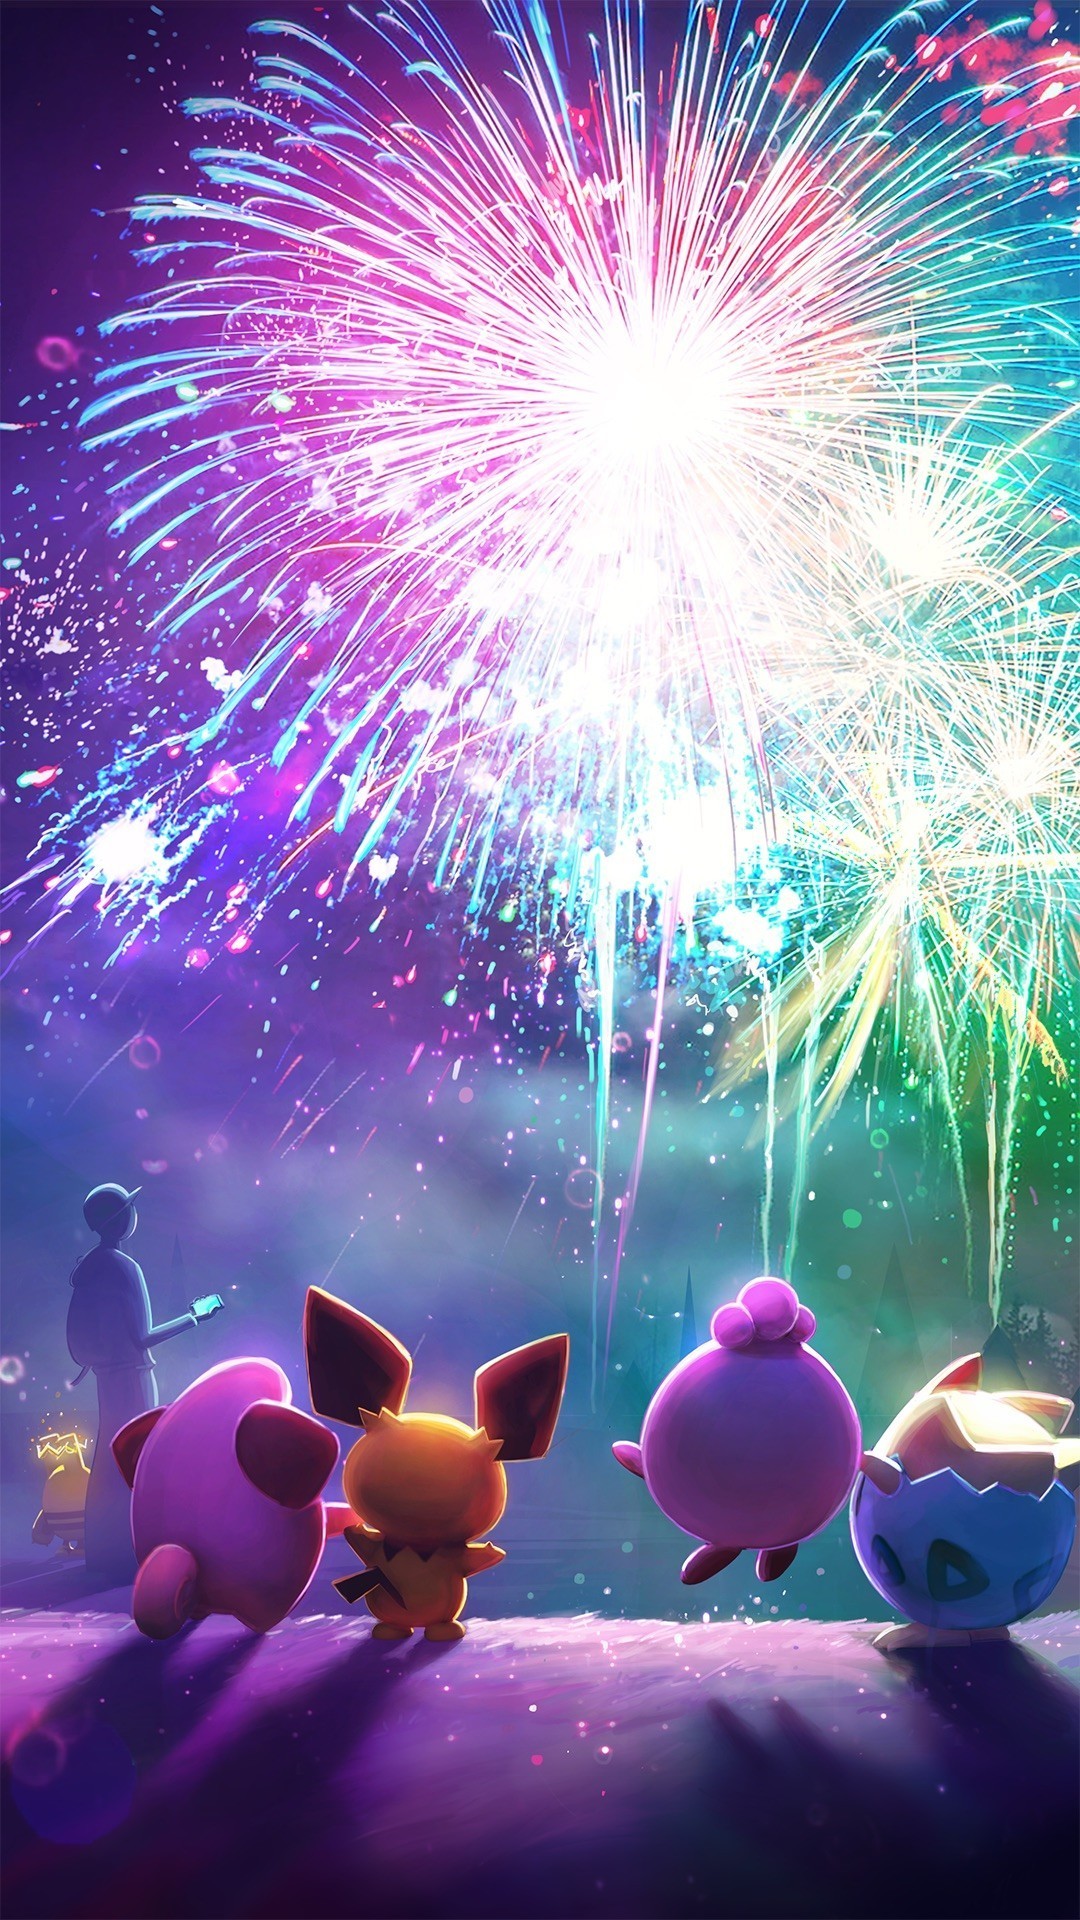 1080x1920 Elekid, Clefa, Pichu, Igglybuff, Togepi, and a lone trainer watch the  fireworks (and wonder where Magby is?)